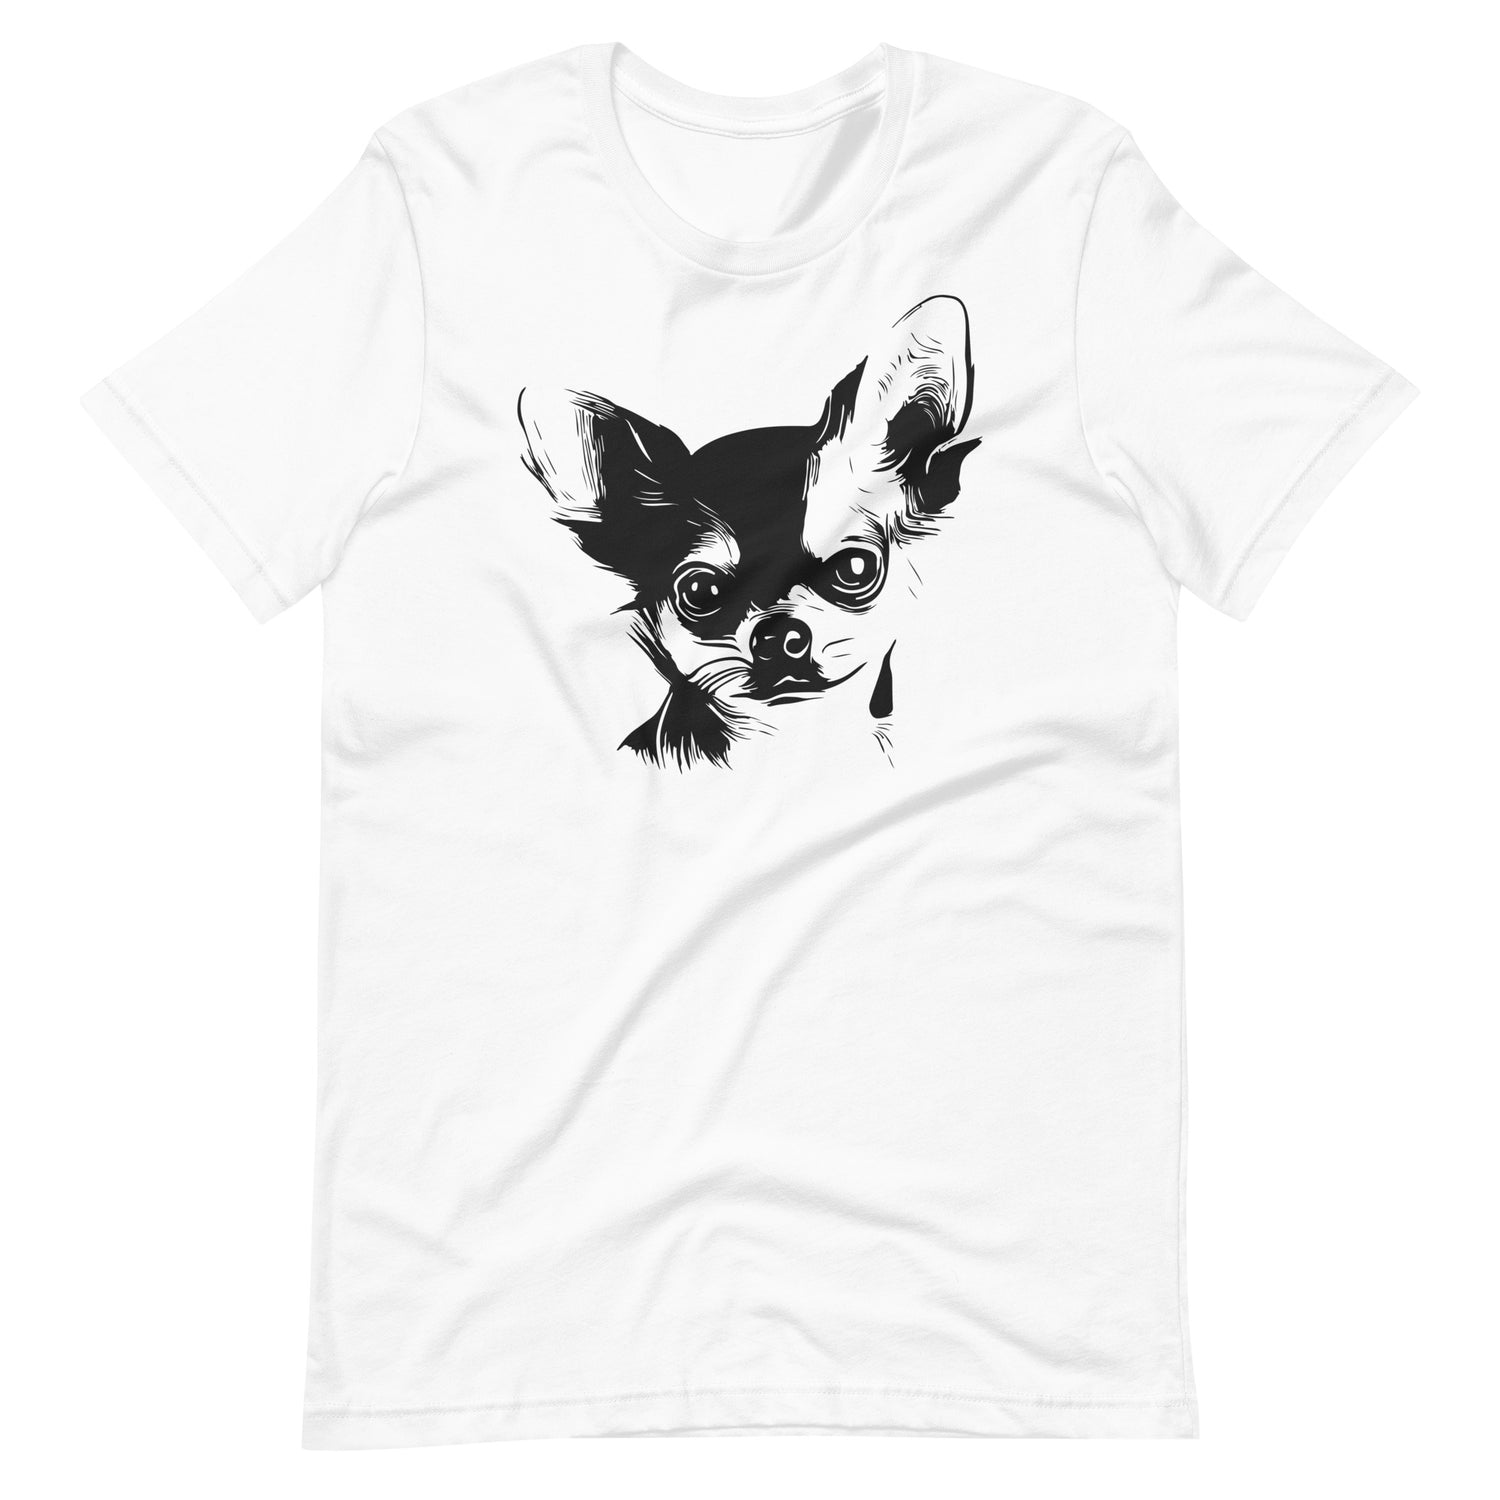 Black Chihuahua face silhouette on unisex white t-shirt